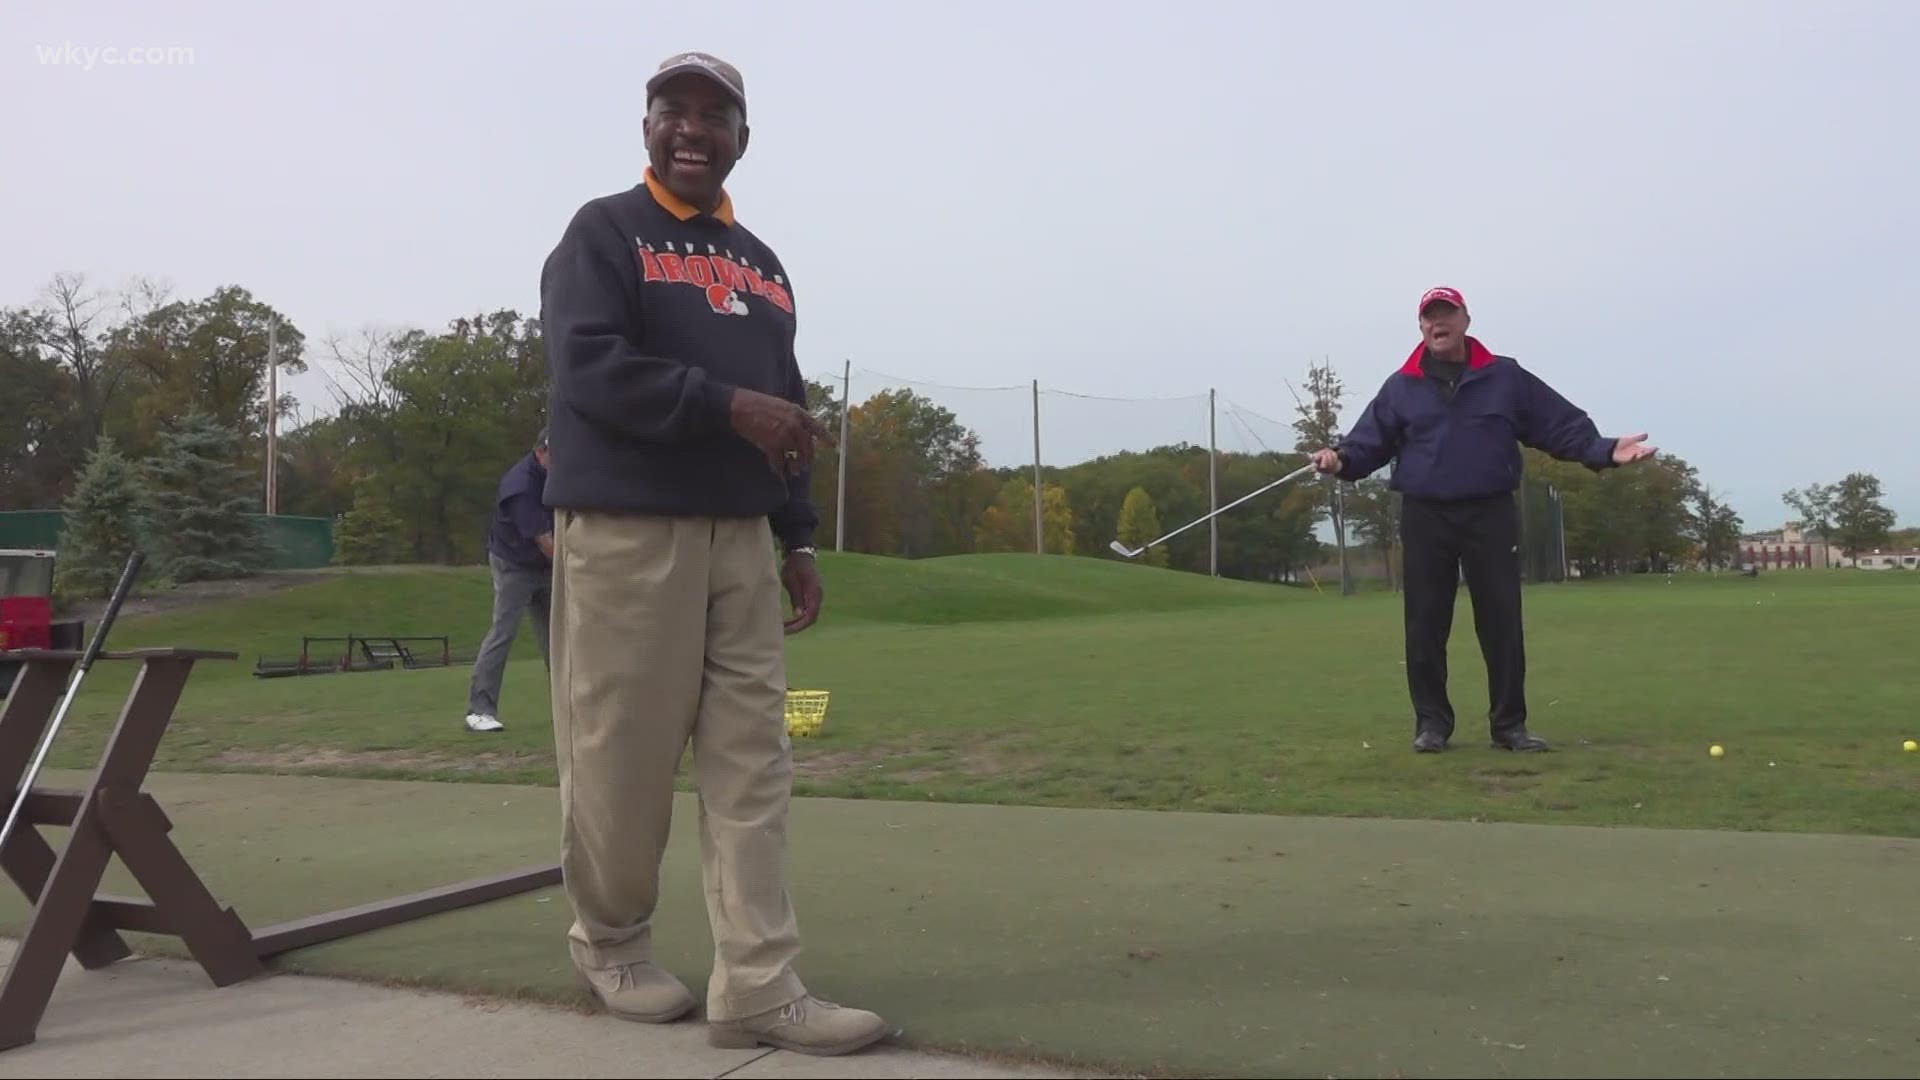 Cecil King, 82, works on a golf course. He can help explain golf, but he knows much more about life, and love. Lindsay Buckingham reports.